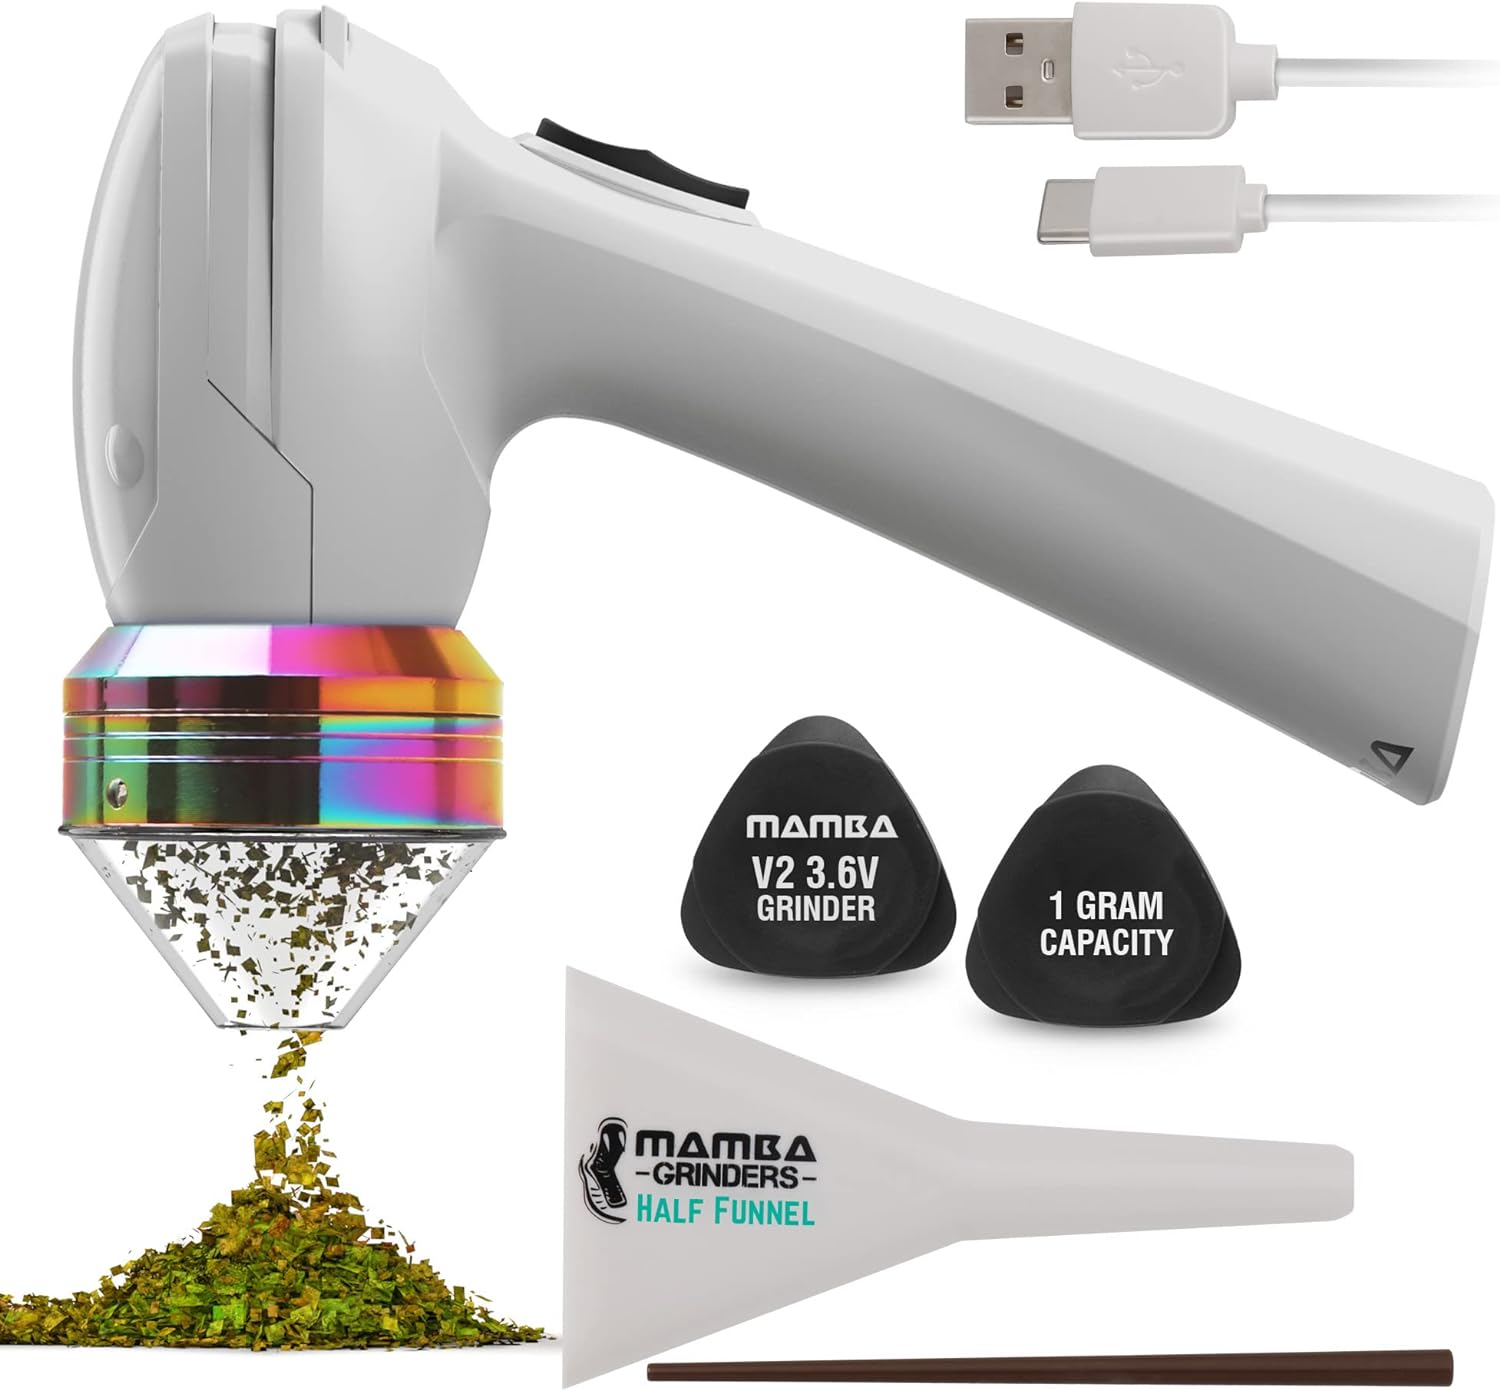 Mamba V2 1g Smoky Electric Portable Herb Grinder. USB Powered Essential Kitchen Mill for Grinding